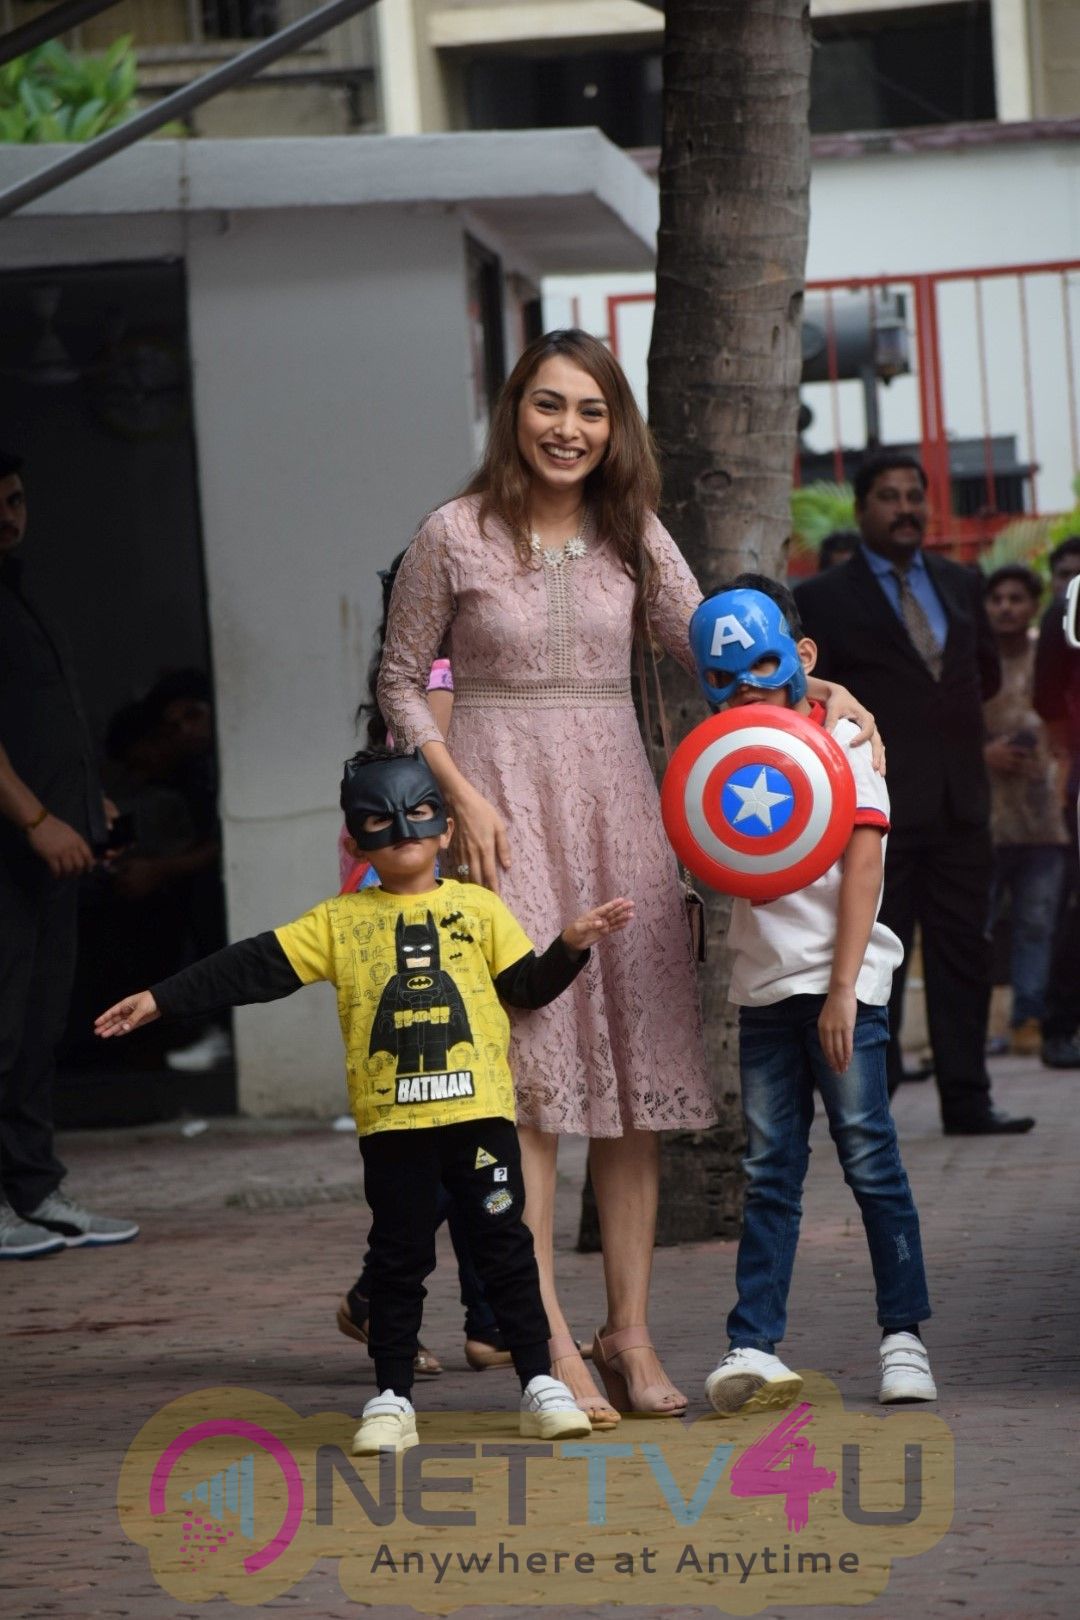 Birthday Party Of Shilpa Shetty's Son Viaan At Her Residence Cute Images Hindi Gallery